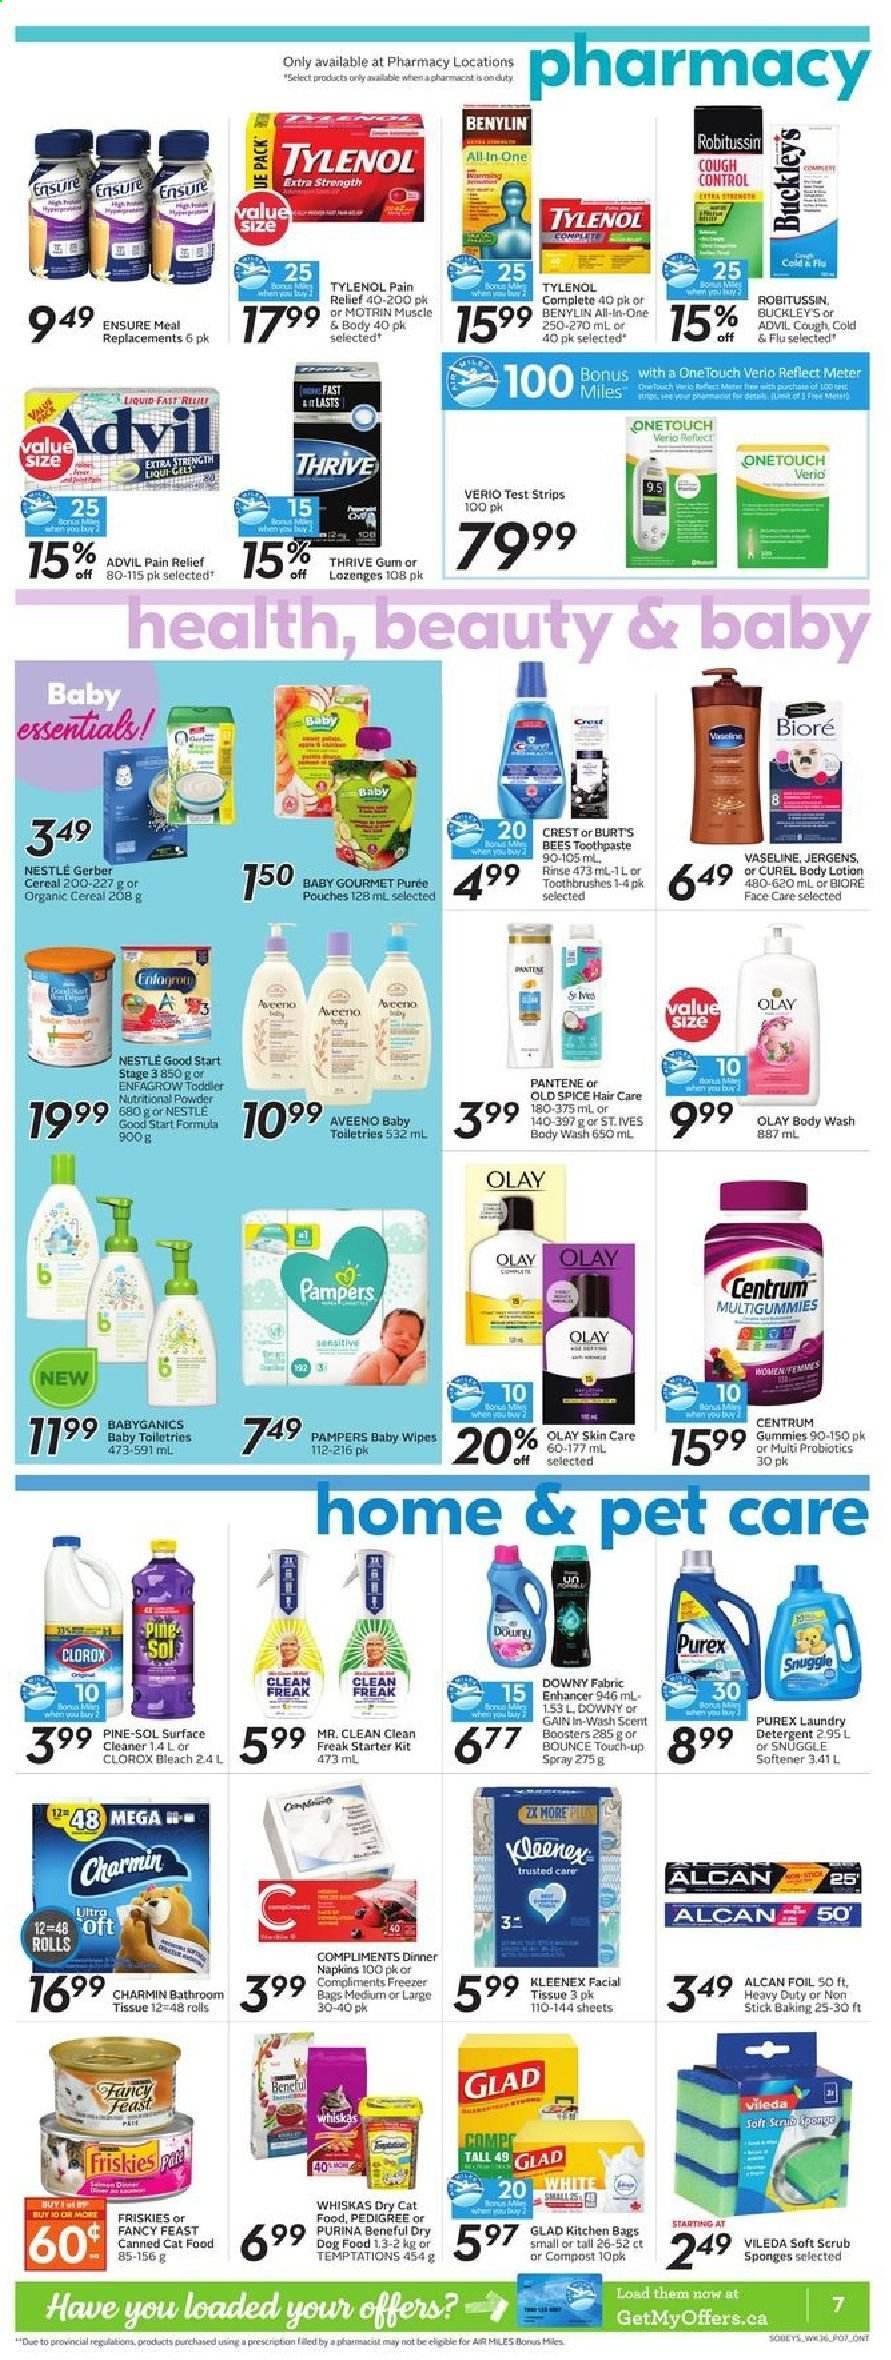 thumbnail - Sobeys Flyer - January 02, 2021 - January 06, 2021 - Sales products - Gerber, cereals, spice, L'Or, baby food pouch, wipes, baby wipes, napkins, Aveeno, bath tissue, Kleenex, Charmin, Gain, surface cleaner, cleaner, bleach, Clorox, Pine-Sol, Snuggle, fabric softener, laundry detergent, Bounce, scent booster, Purex, Downy Laundry, body wash, Vaseline, toothpaste, Crest, Olay, Curél, Bioré®, body lotion, Jergens, bag, animal food, cat food, dog food, Purina, Pedigree, dry dog food, dry cat food, Fancy Feast, Friskies, pain relief, Cold & Flu, Tylenol, probiotics, Advil Rapid, Centrum, Benylin, Motrin, Nestlé, Robitussin, Pampers, Pantene, Old Spice. Page 8.